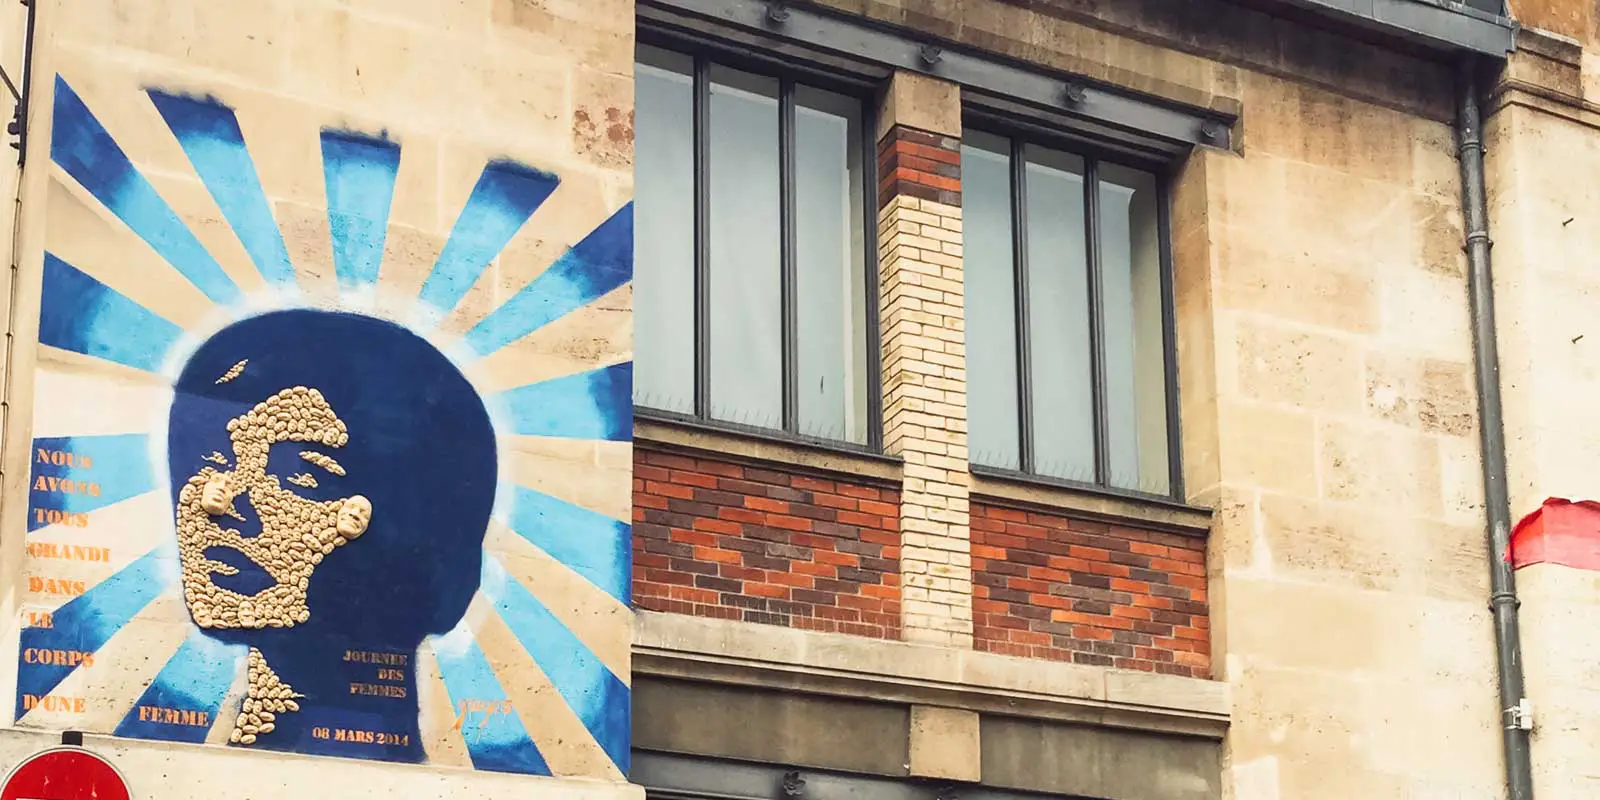 Street art on a building showing a silhouette of a woman's face made from smaller faces, with blue rays in the background.